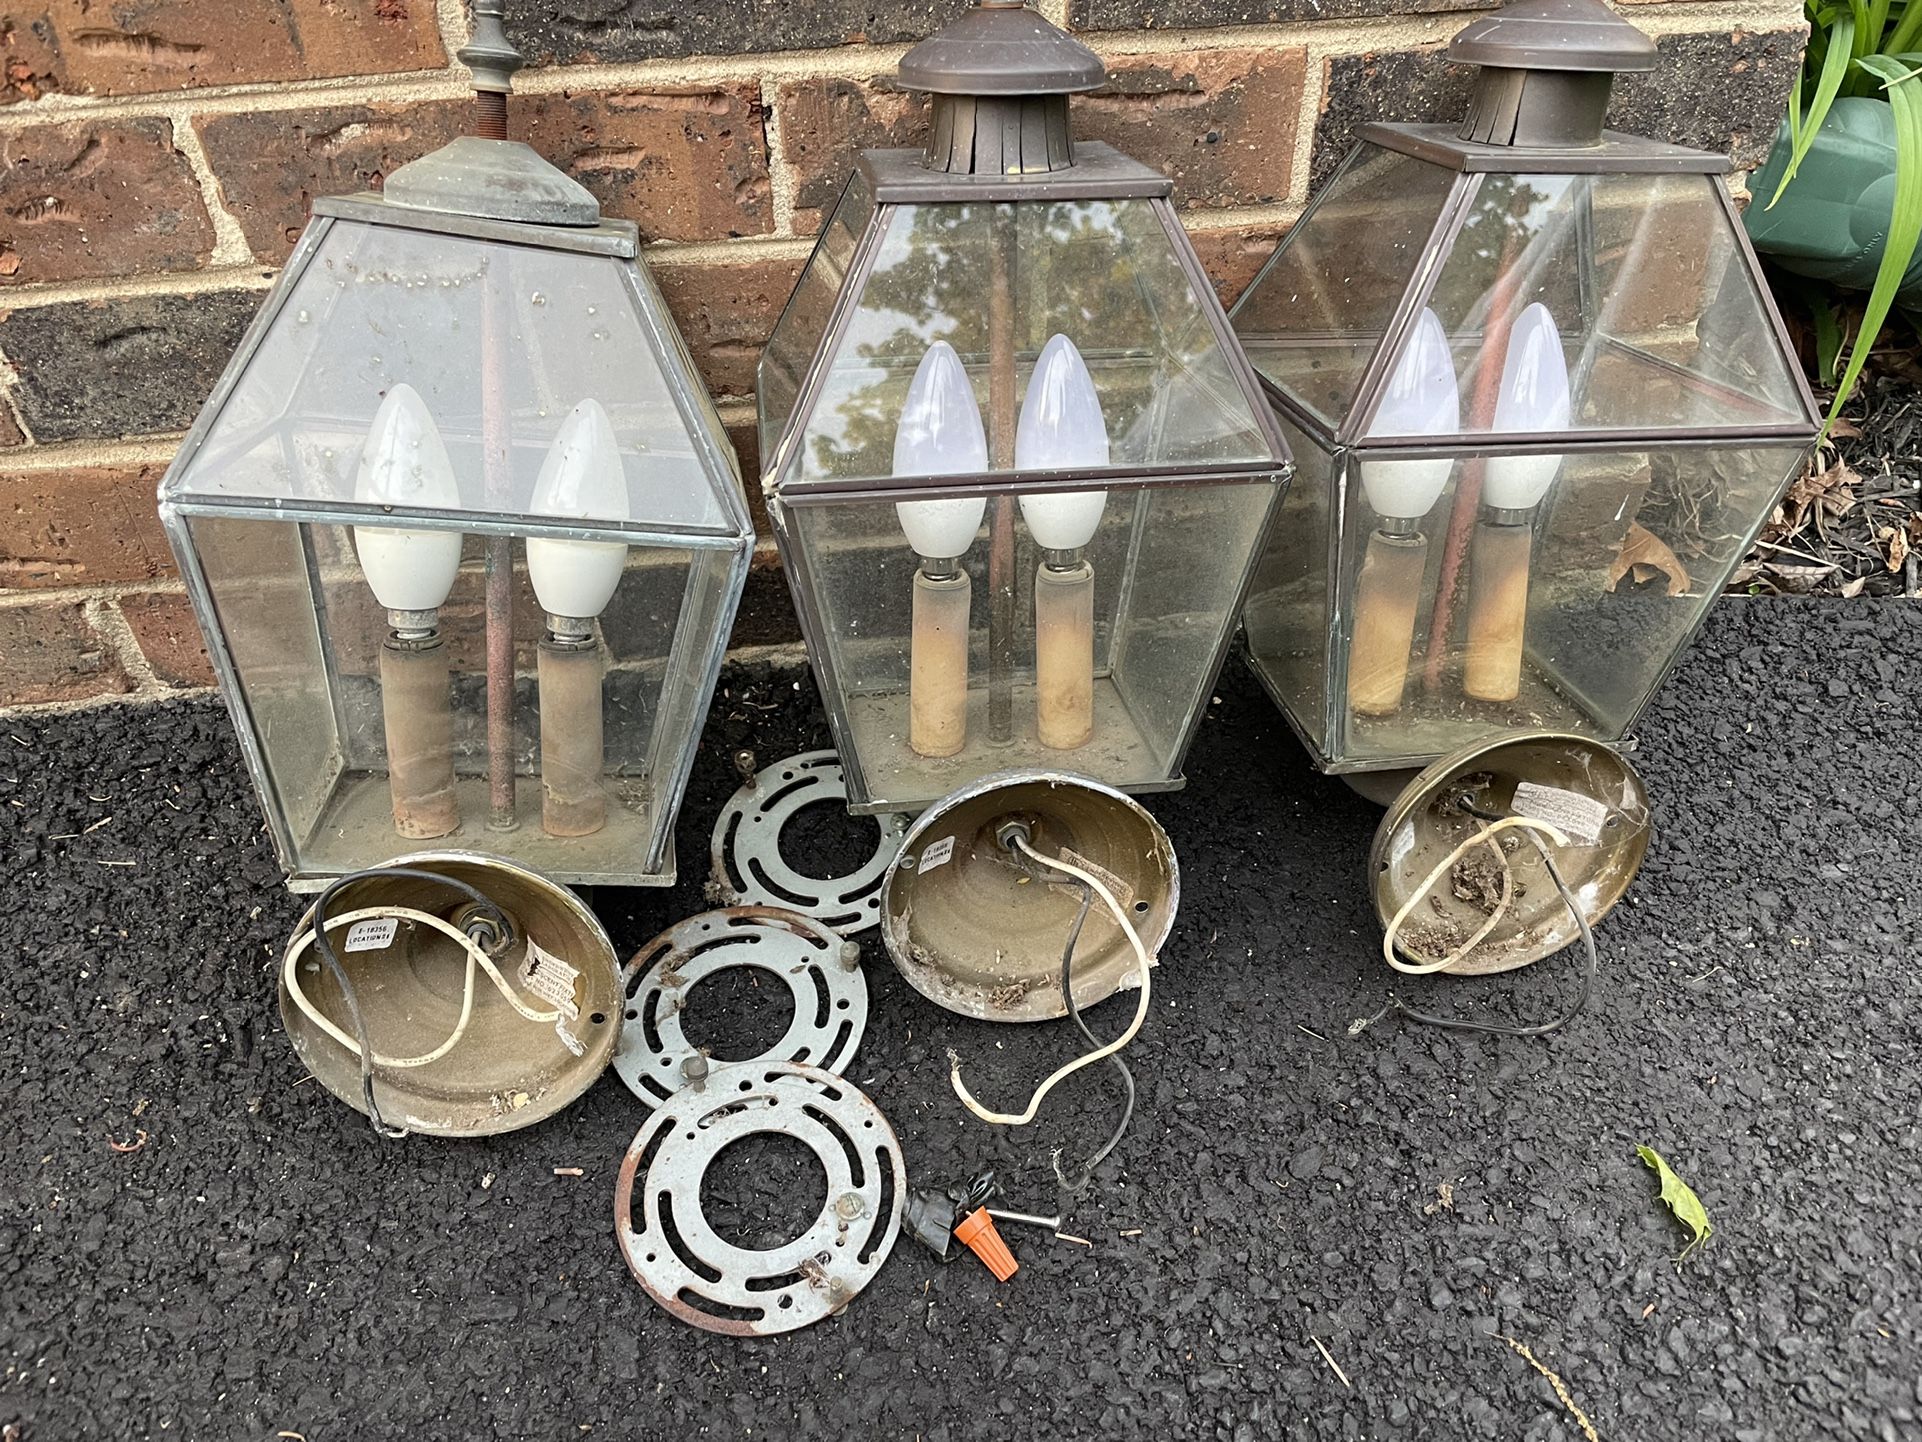 Free - 3 Outdoor Lights/Lanterns with LED Bulbs